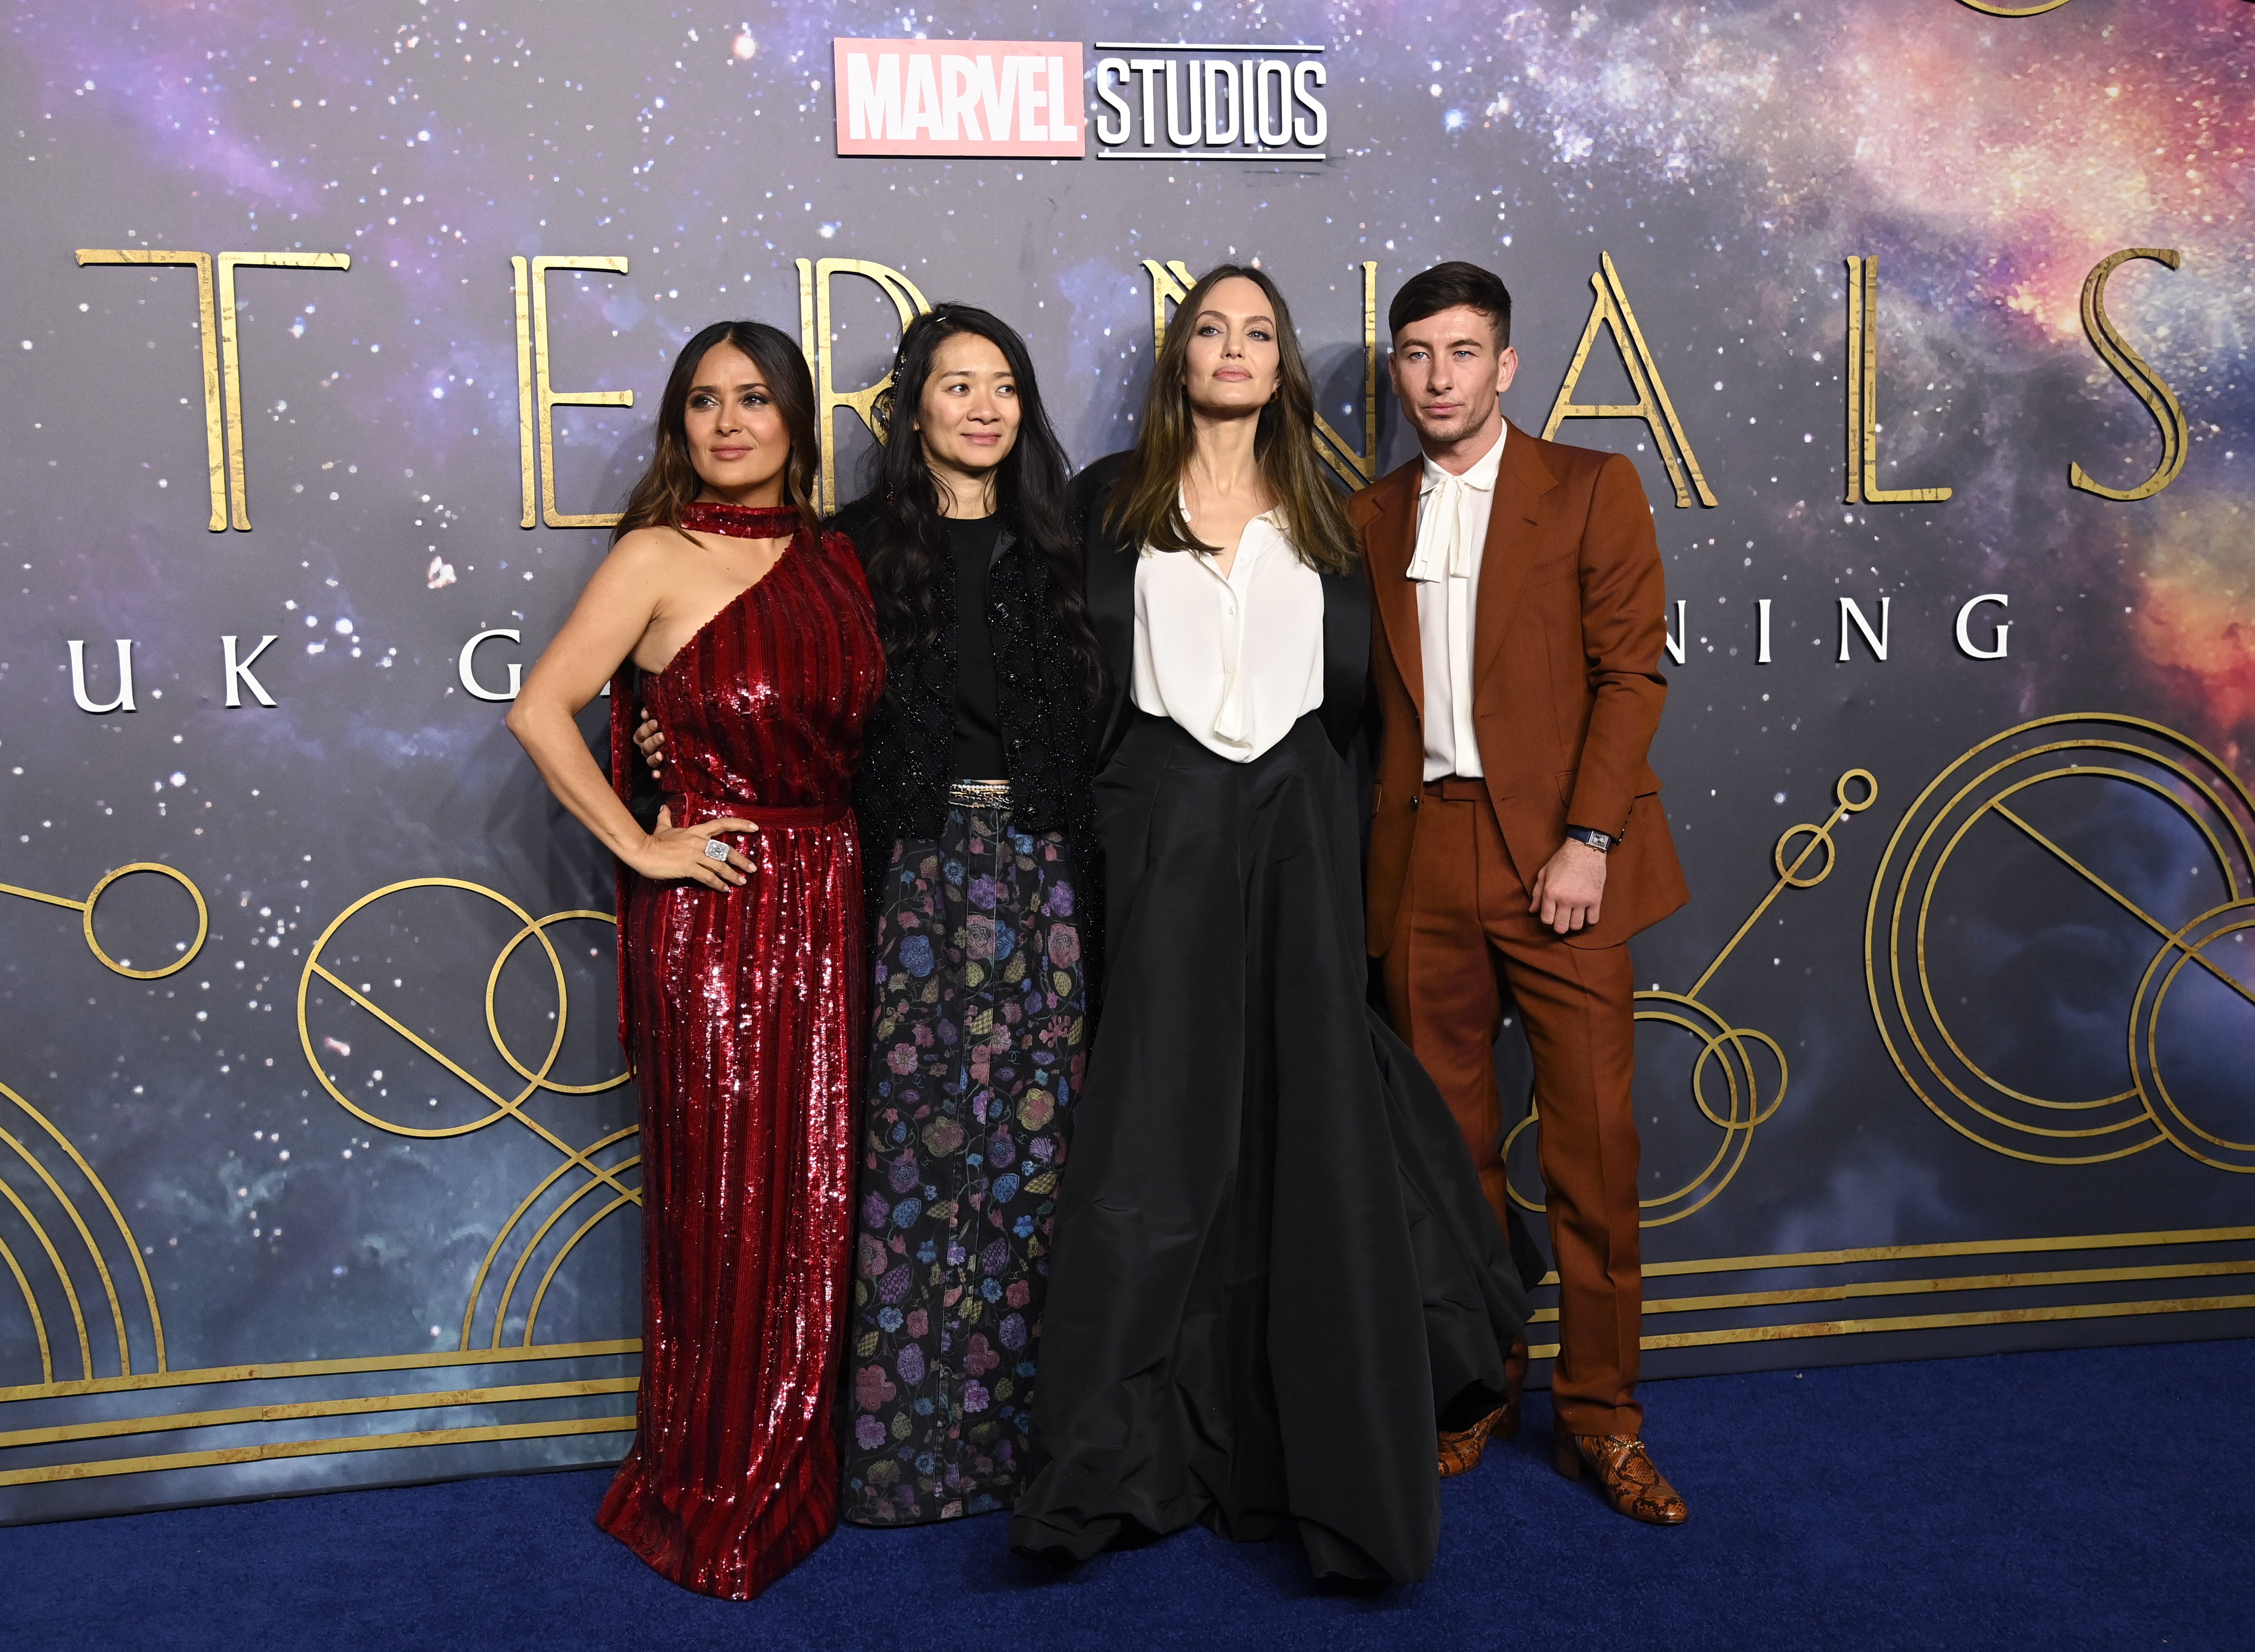 Salma Hayek, Chloe Zhao, Angelina Jolie, and Barry Keoghan pose for pictures on the red carpet at the 'Eternals' premiere. Hayek wears a sparkly red dress. Zhao wears a black top and long floral skirt. Jolie, who is in an 'Eternals' post-credits scene, wears a black and white dress. Keoghan wears a brown suit over a white shirt.